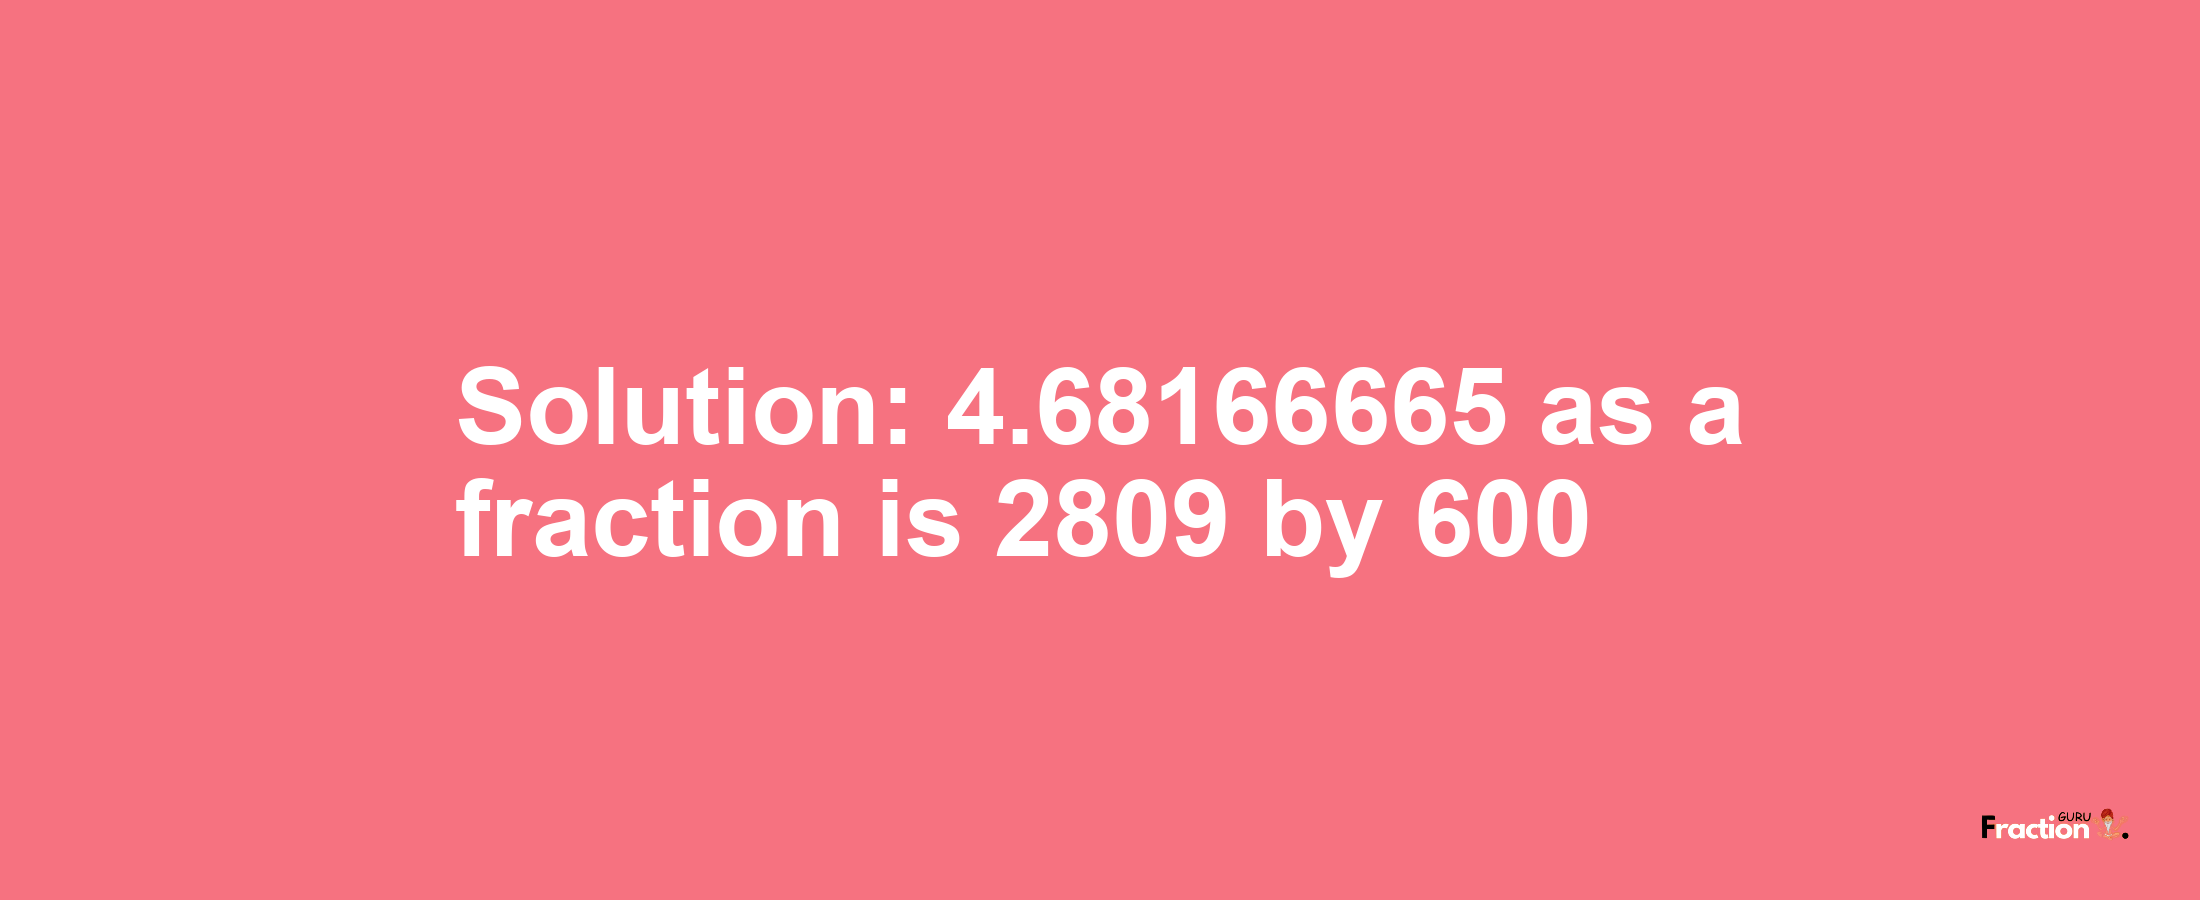 Solution:4.68166665 as a fraction is 2809/600